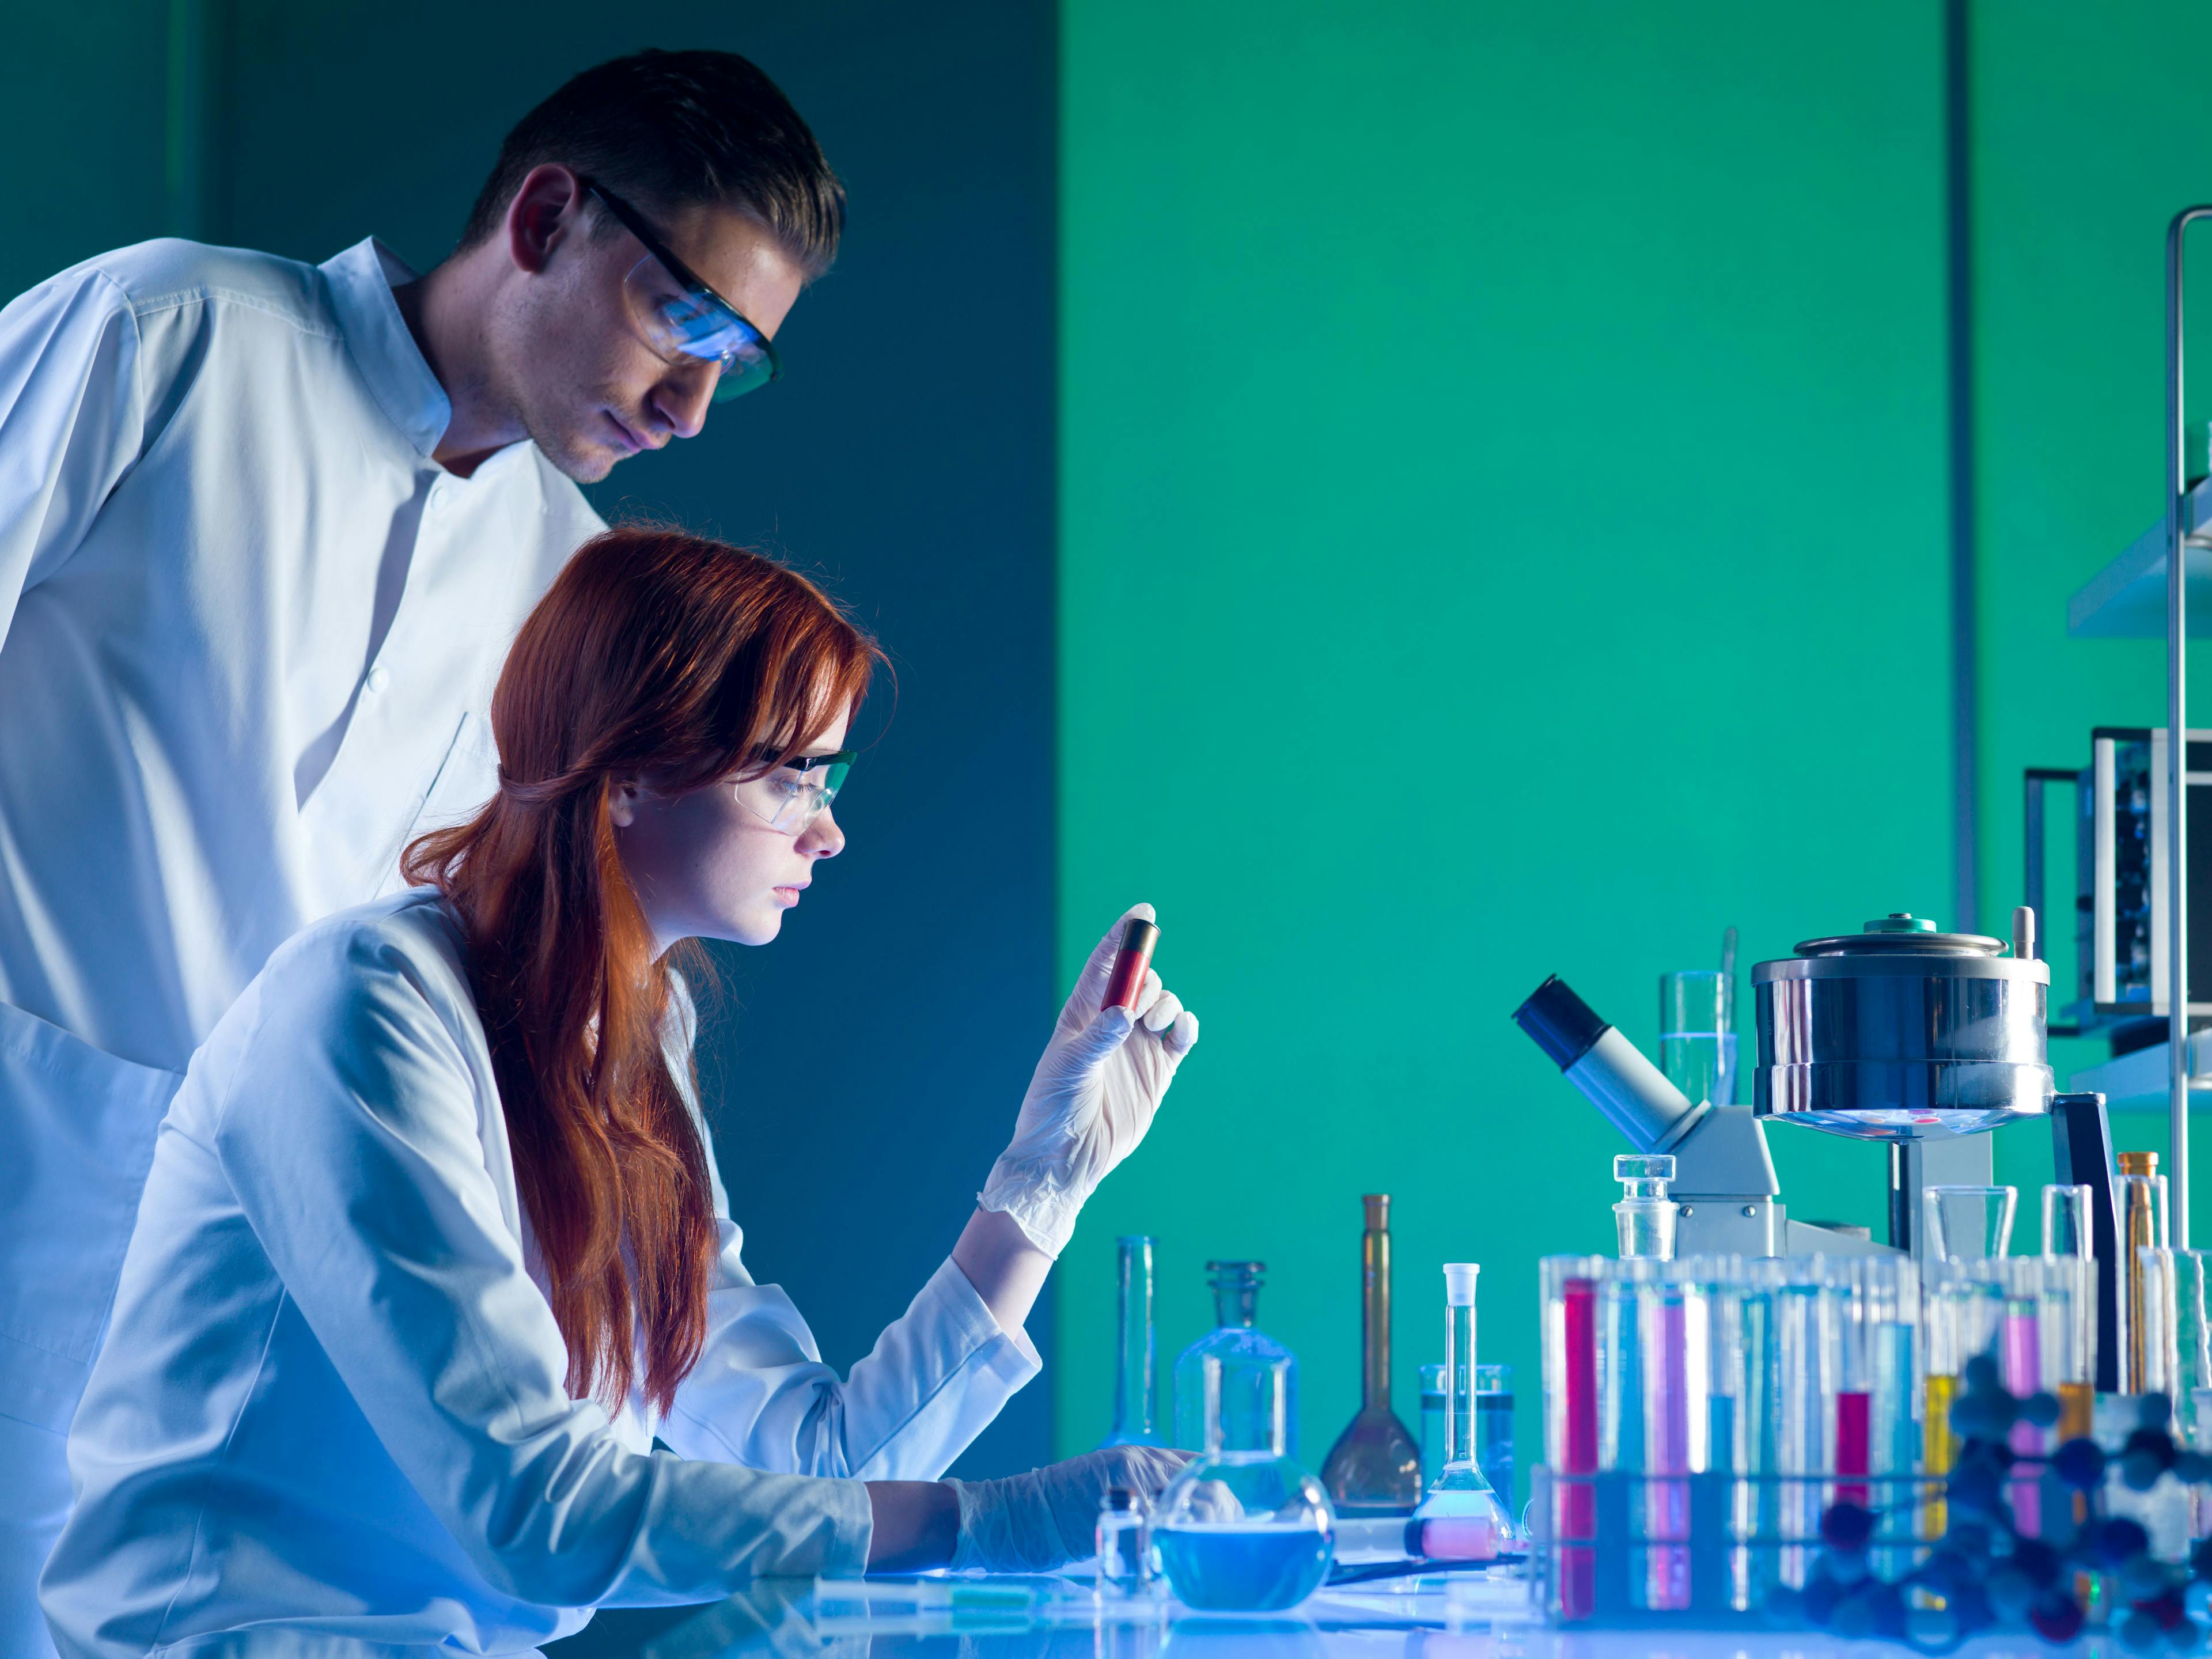 Forensic scientists studying a cartridge | Image Credit: © Daco - stock.adobe.com